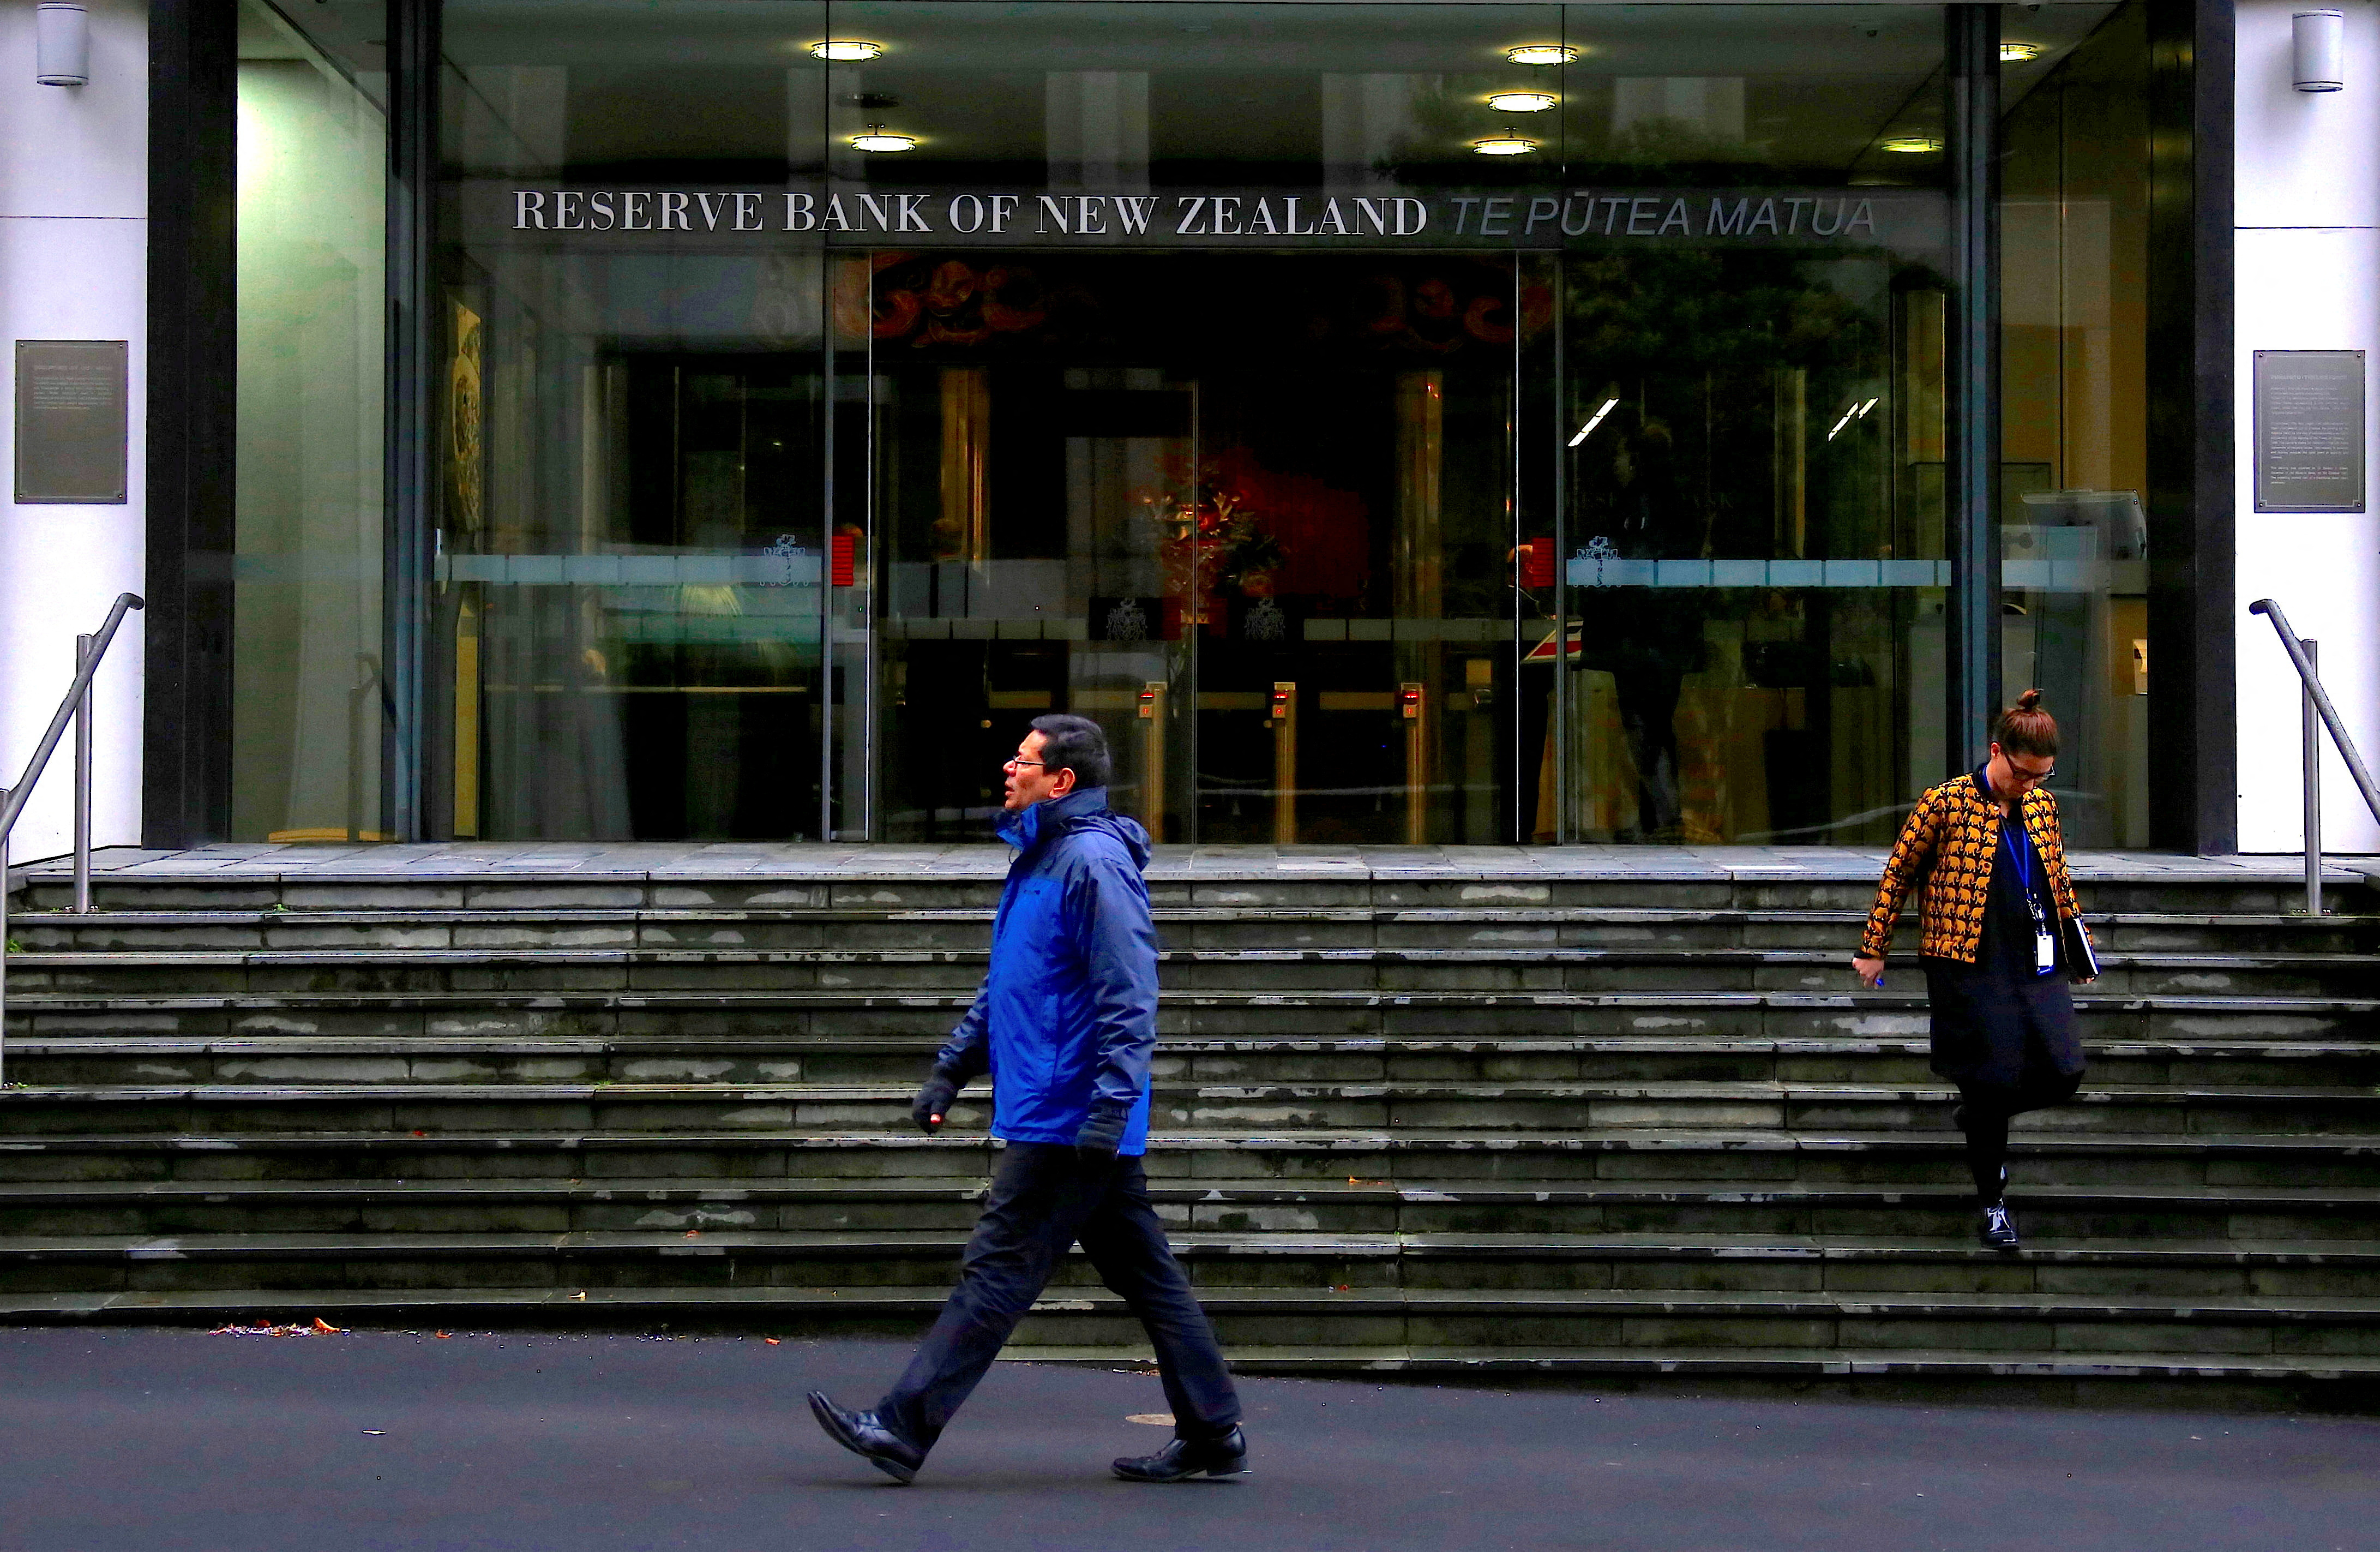 Pedestrians walk near the main entrance to the Reserve Bank of New Zealand located in central Wellington, New Zealand